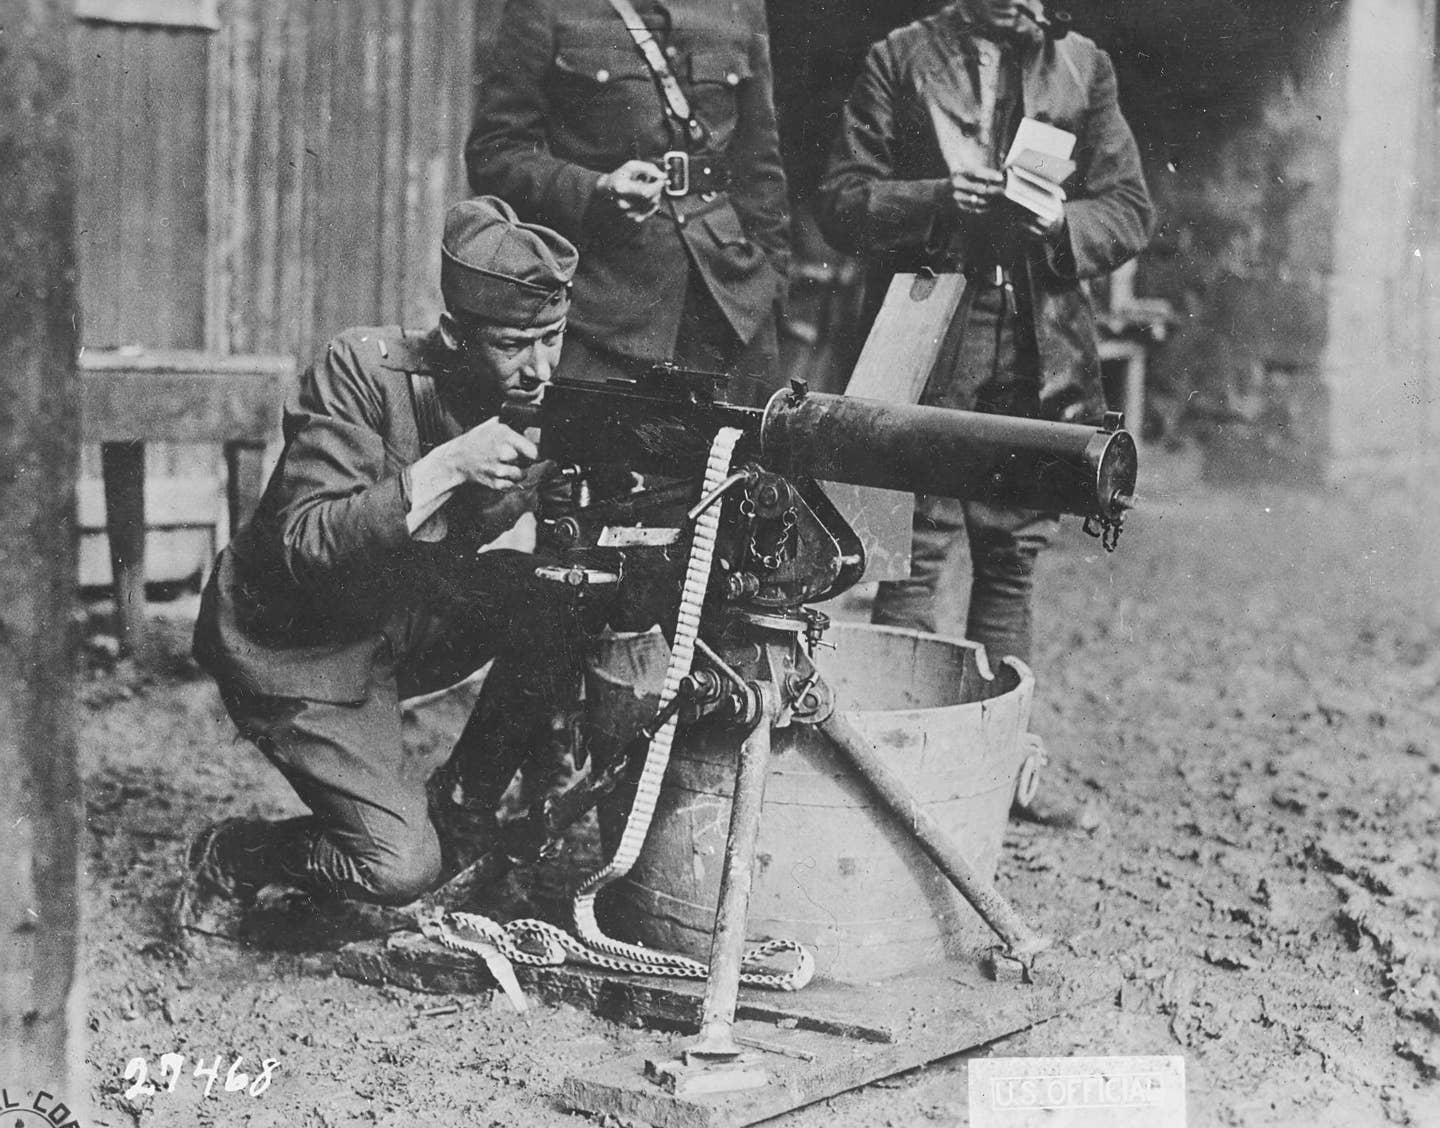 United States Army personnel, including the son of John Moses Browning, fire an M1917 heavy machine gun. (U.S. Army photo)